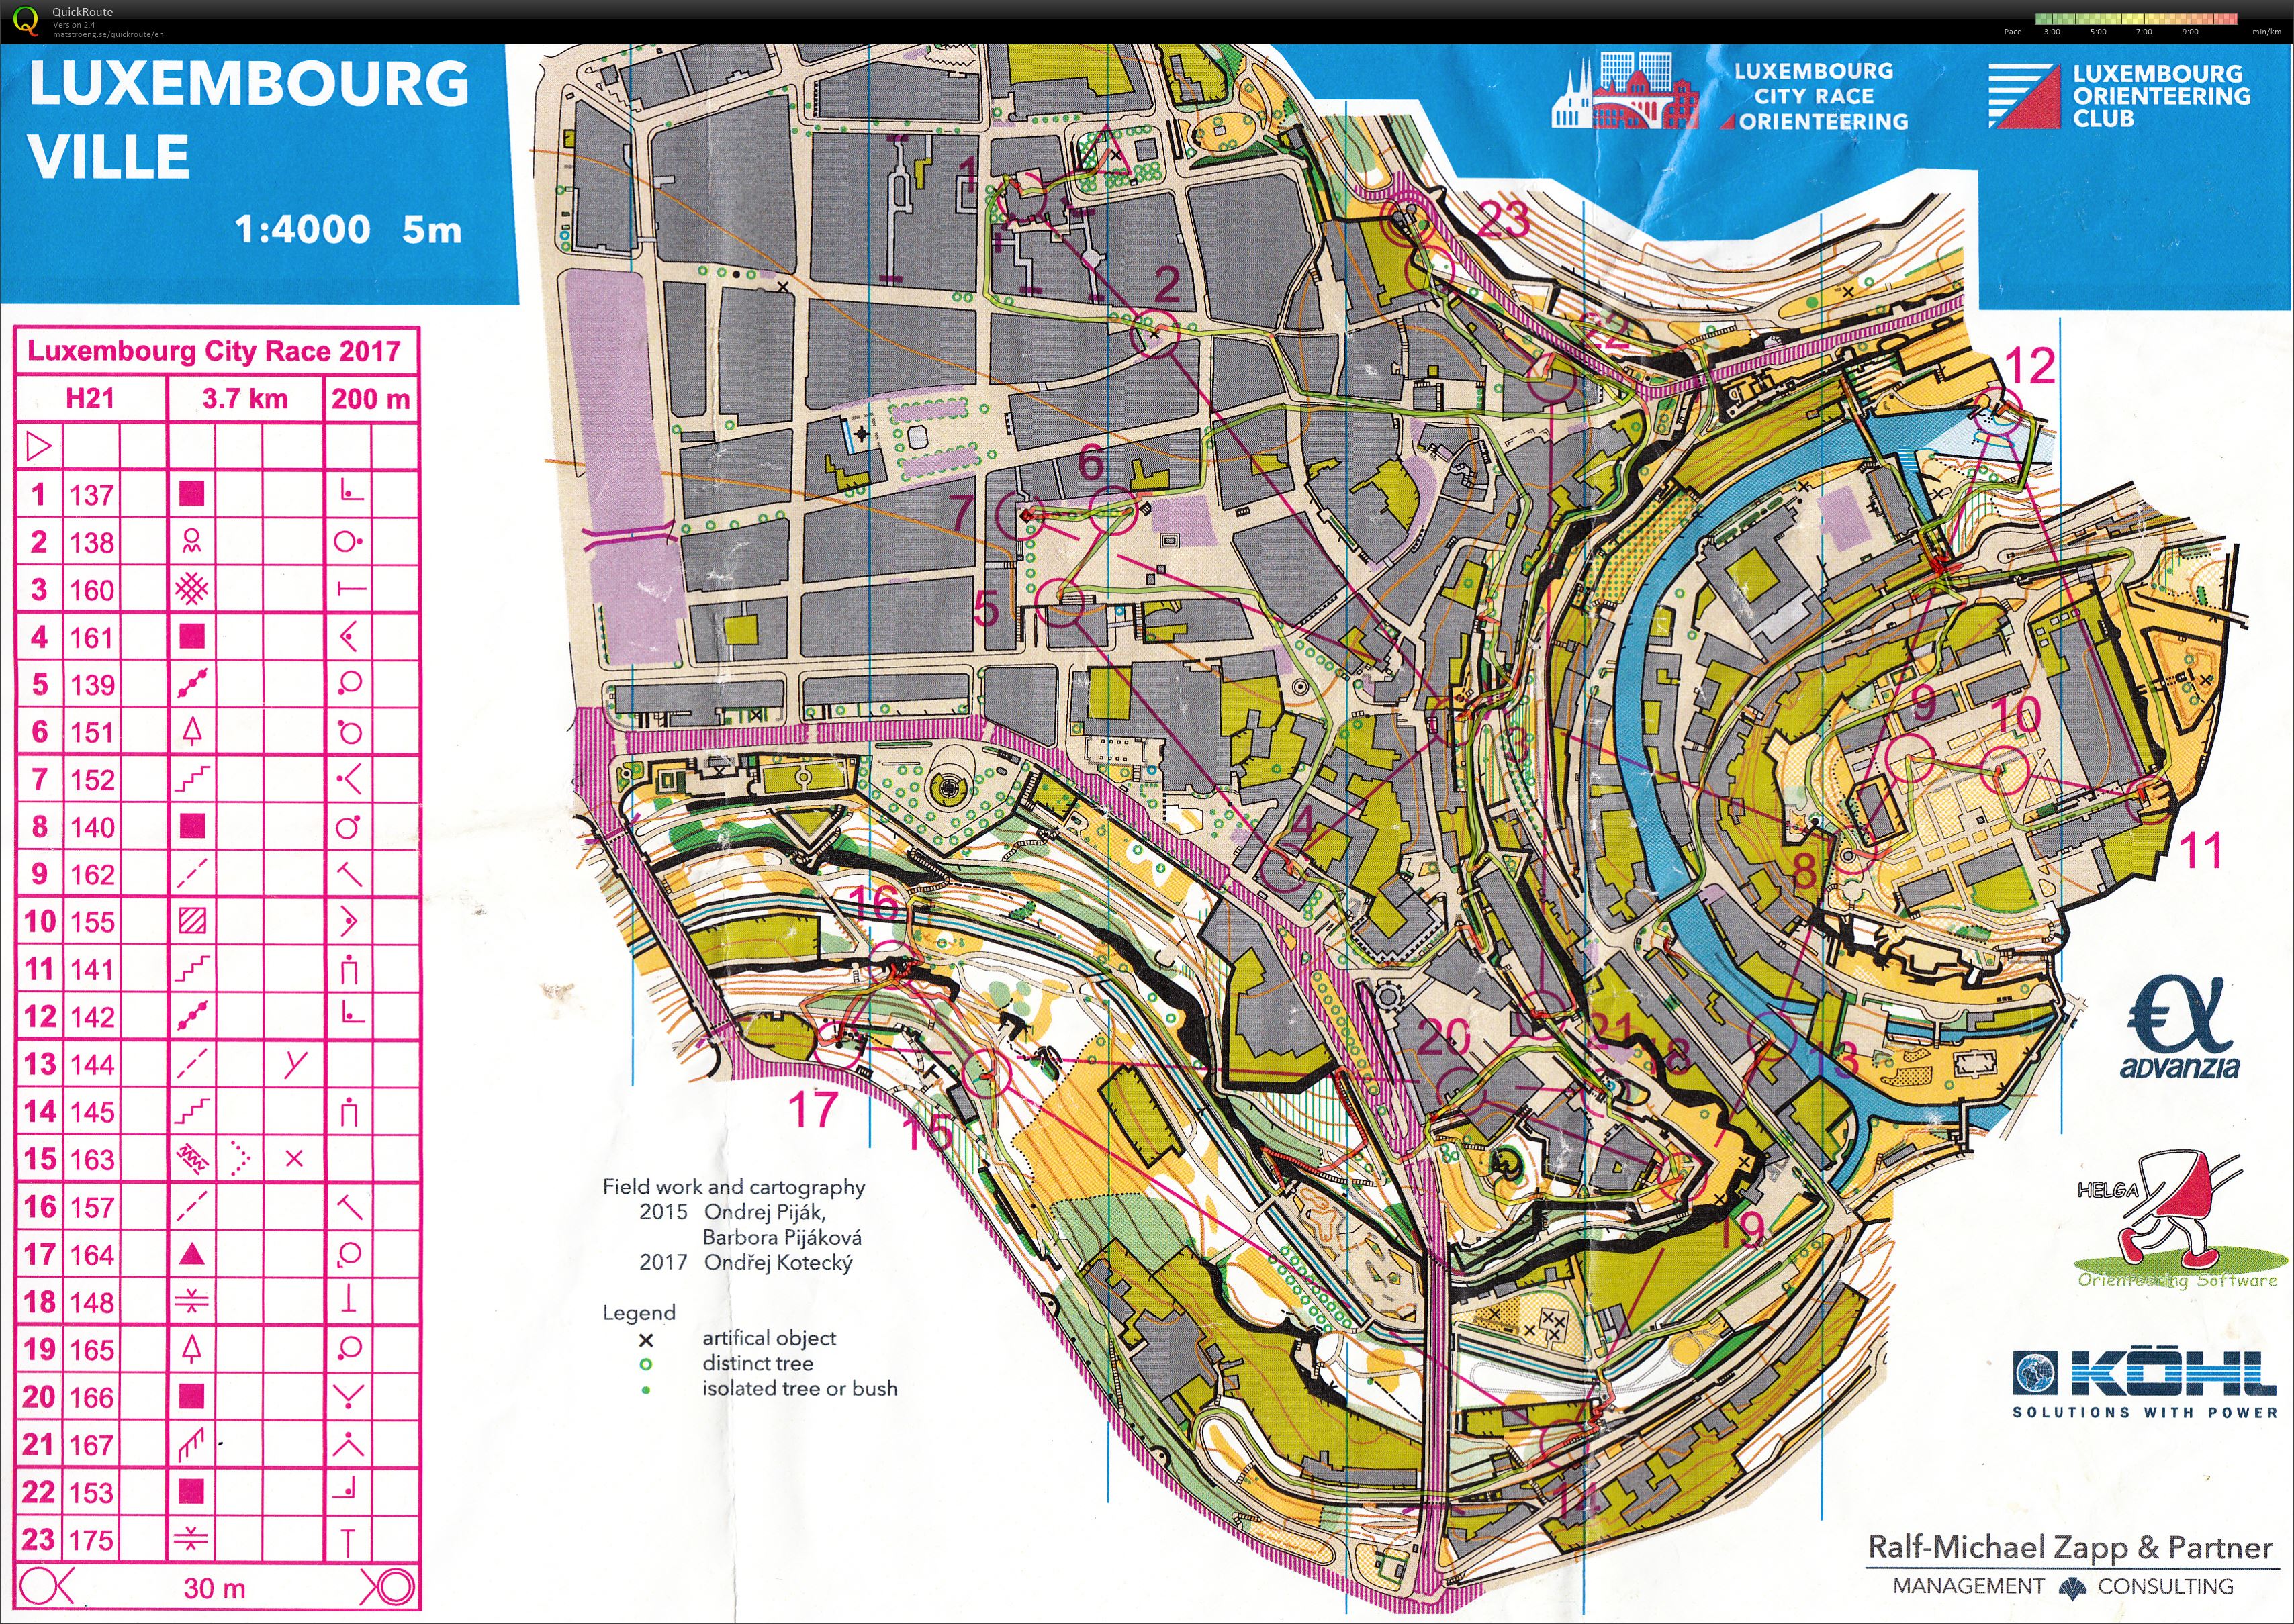 Luxembourg City Race (05/11/2017)